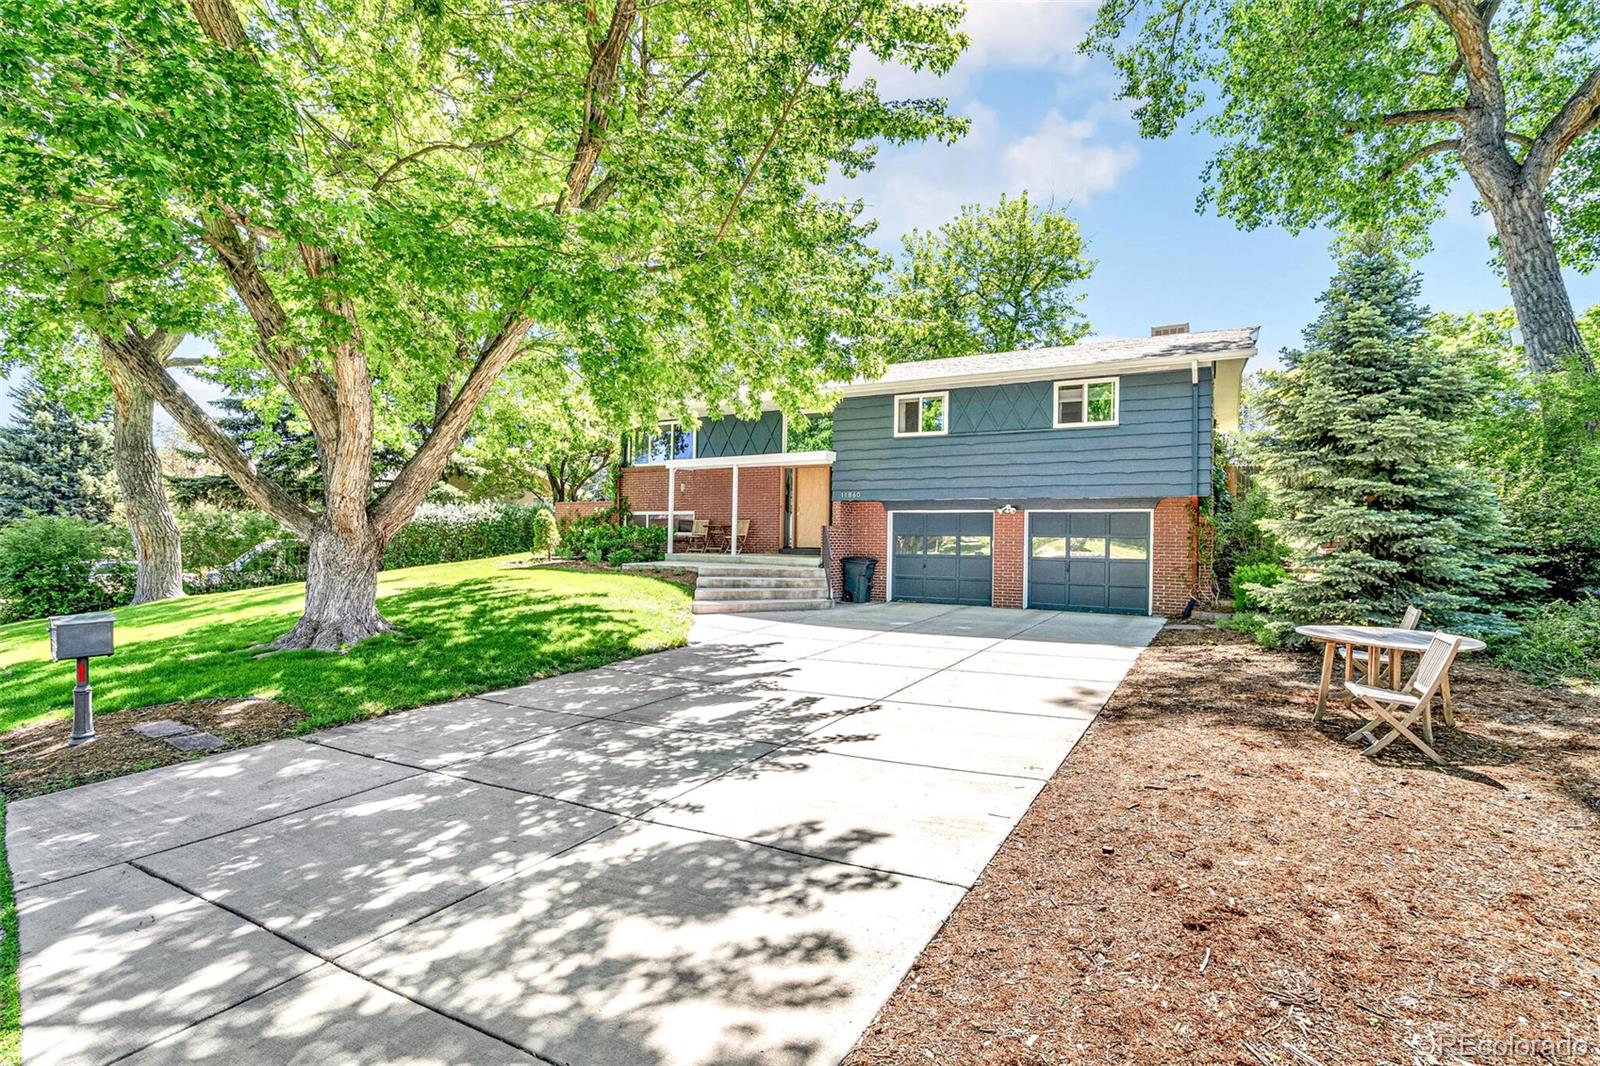 Report Image for 11860  Swadley Drive,Lakewood, Colorado